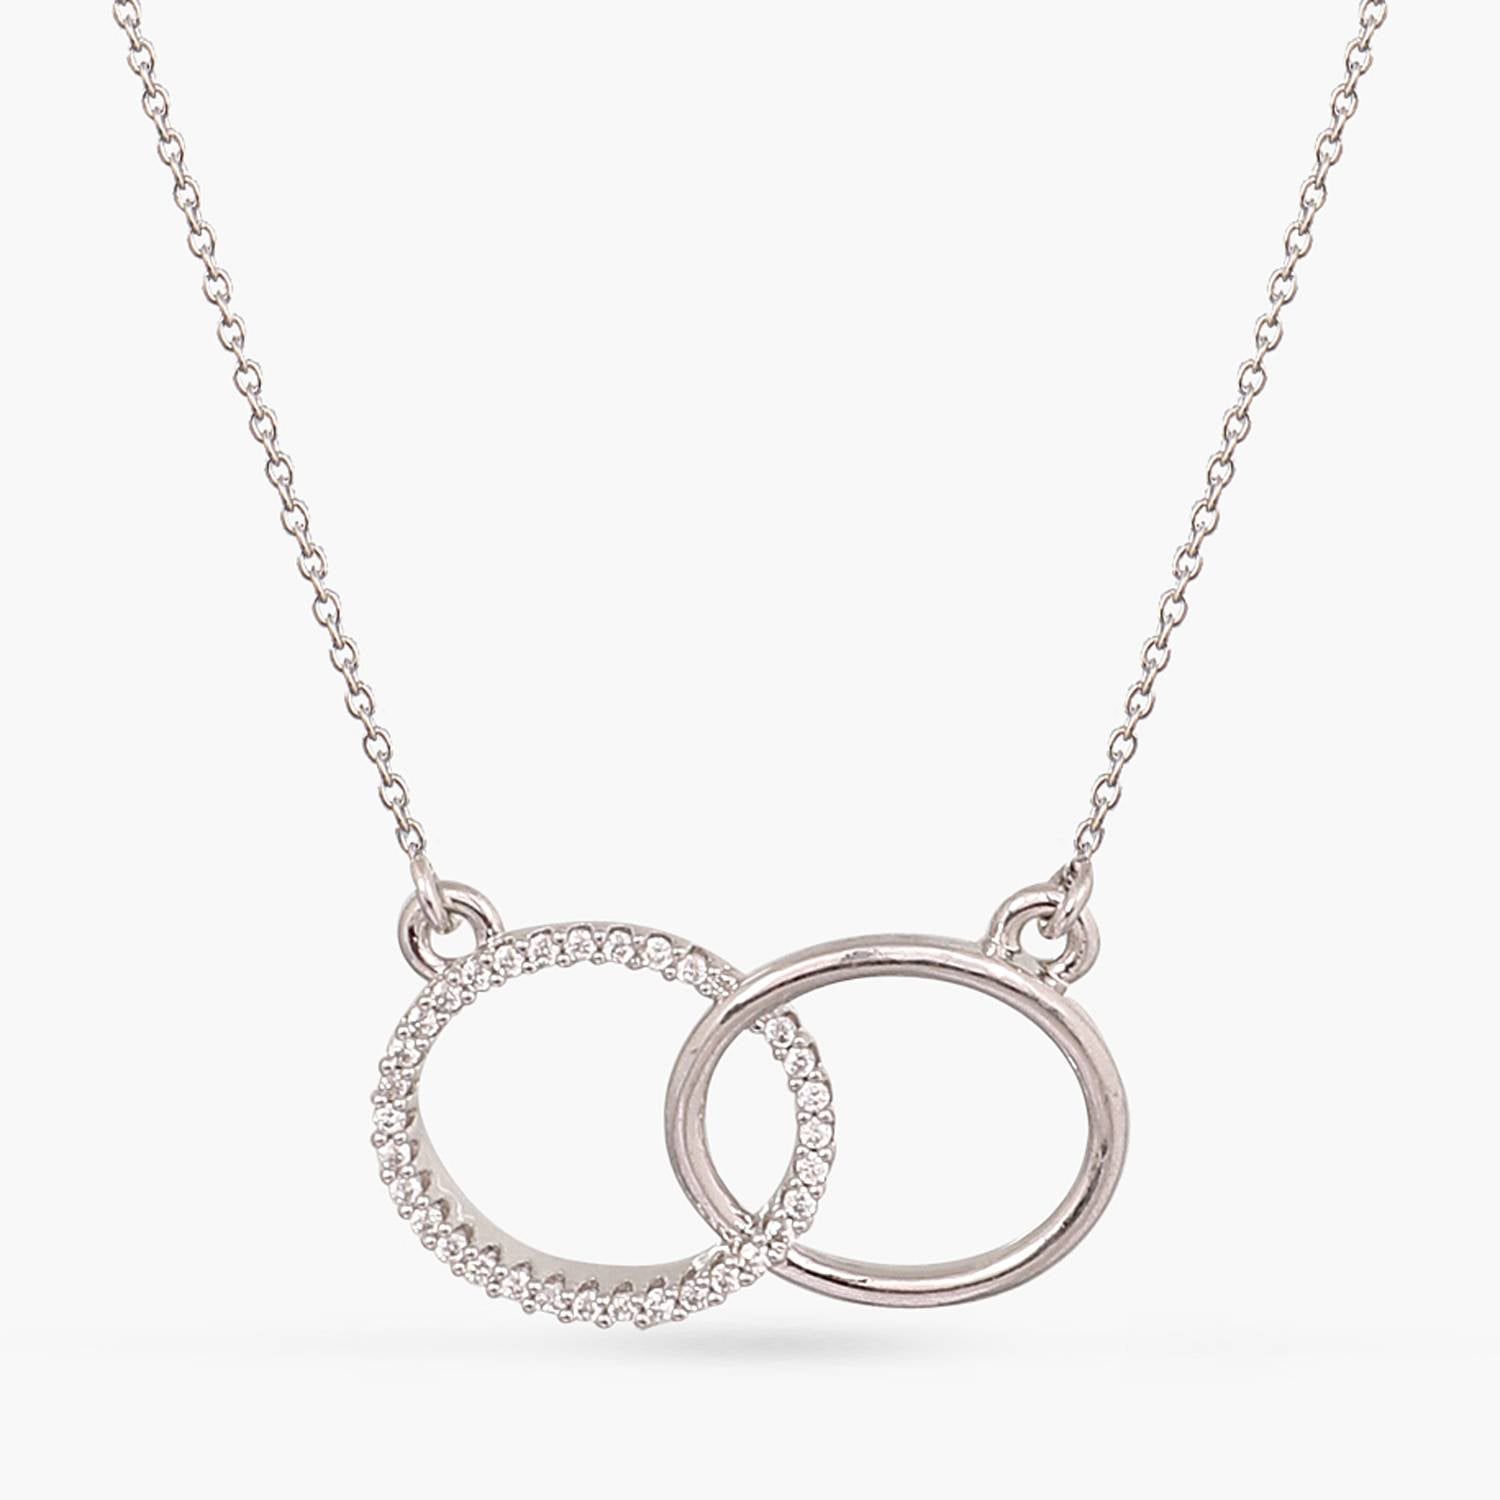 Adjustable Necklace with Double Line Ring Pendant - Silver | APM Monaco